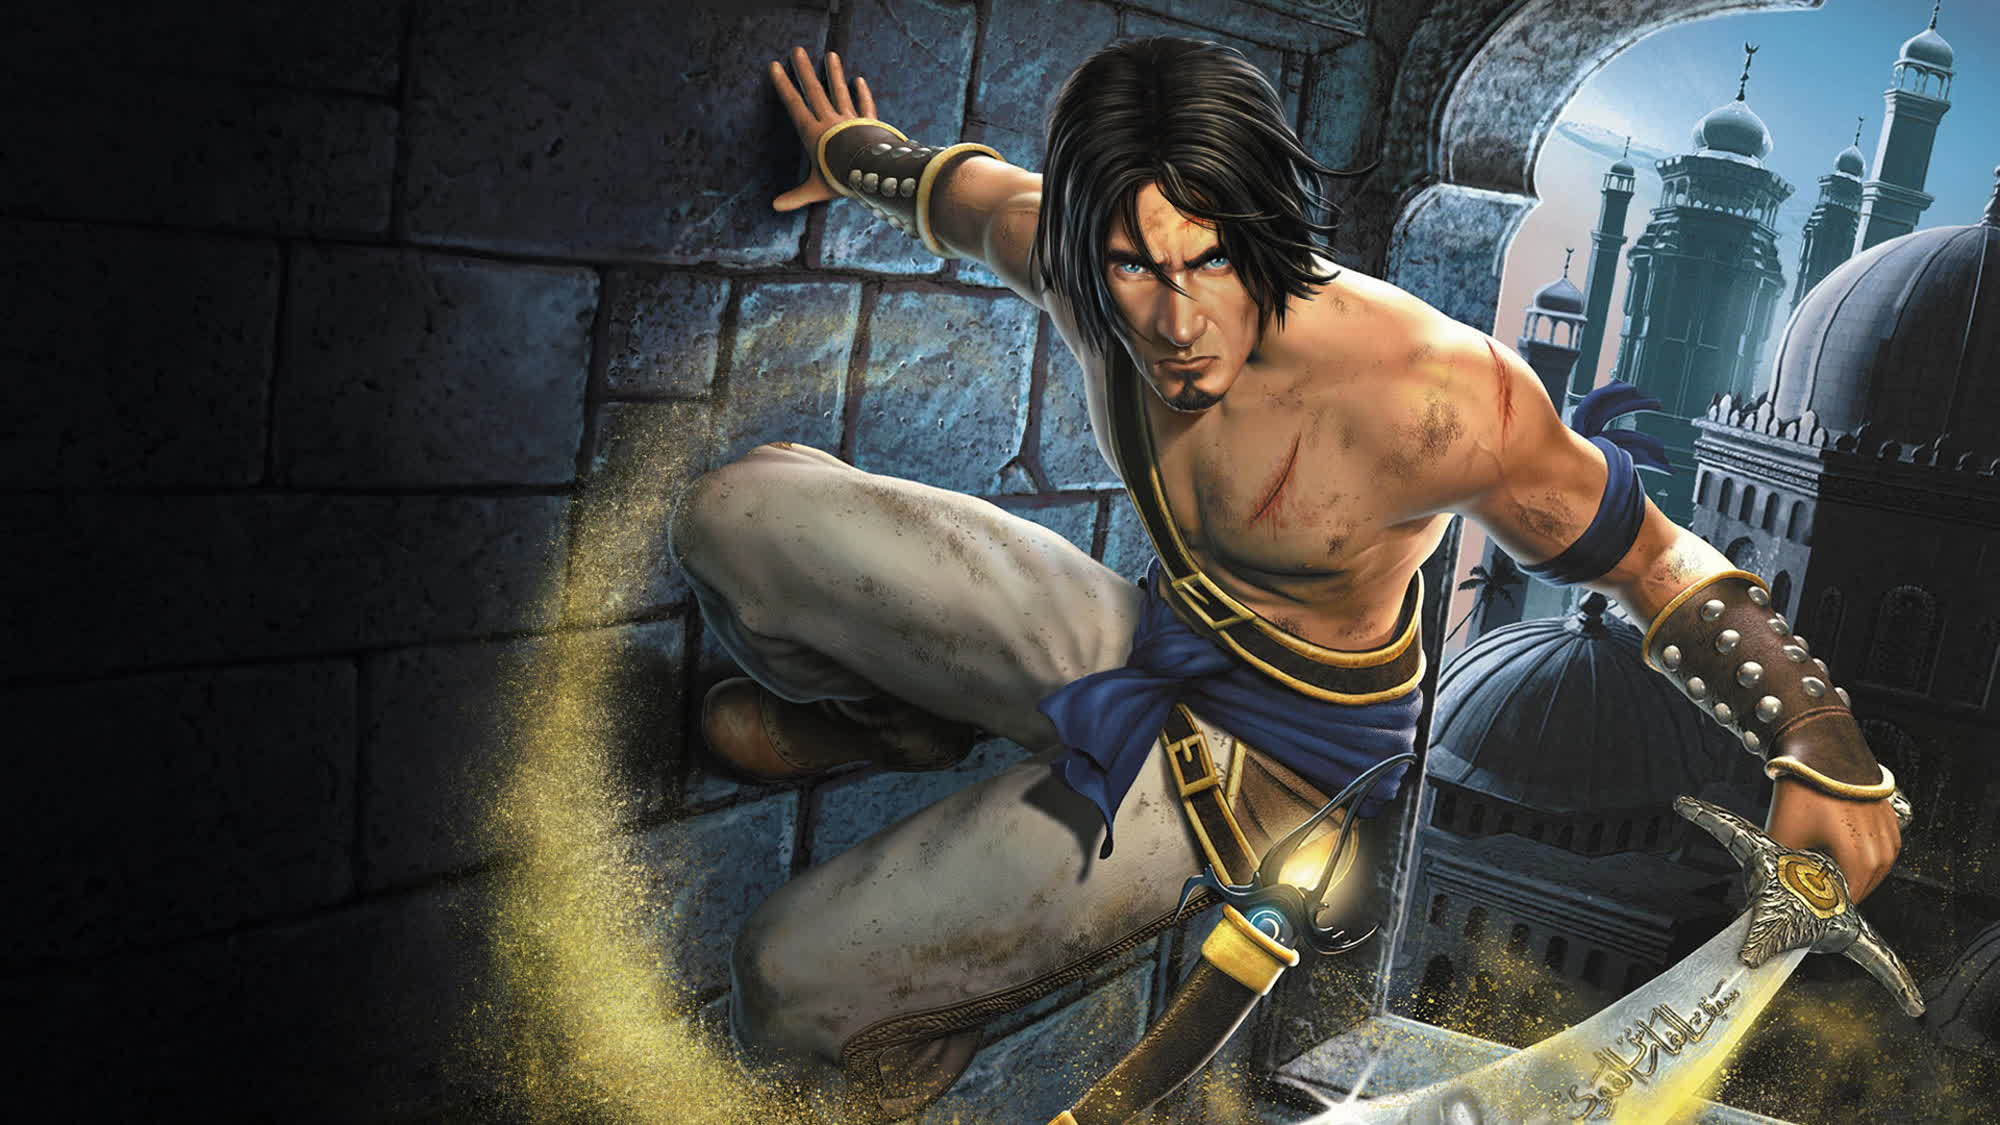 Prince of Persia: The Sands of Time remake is back to square zero